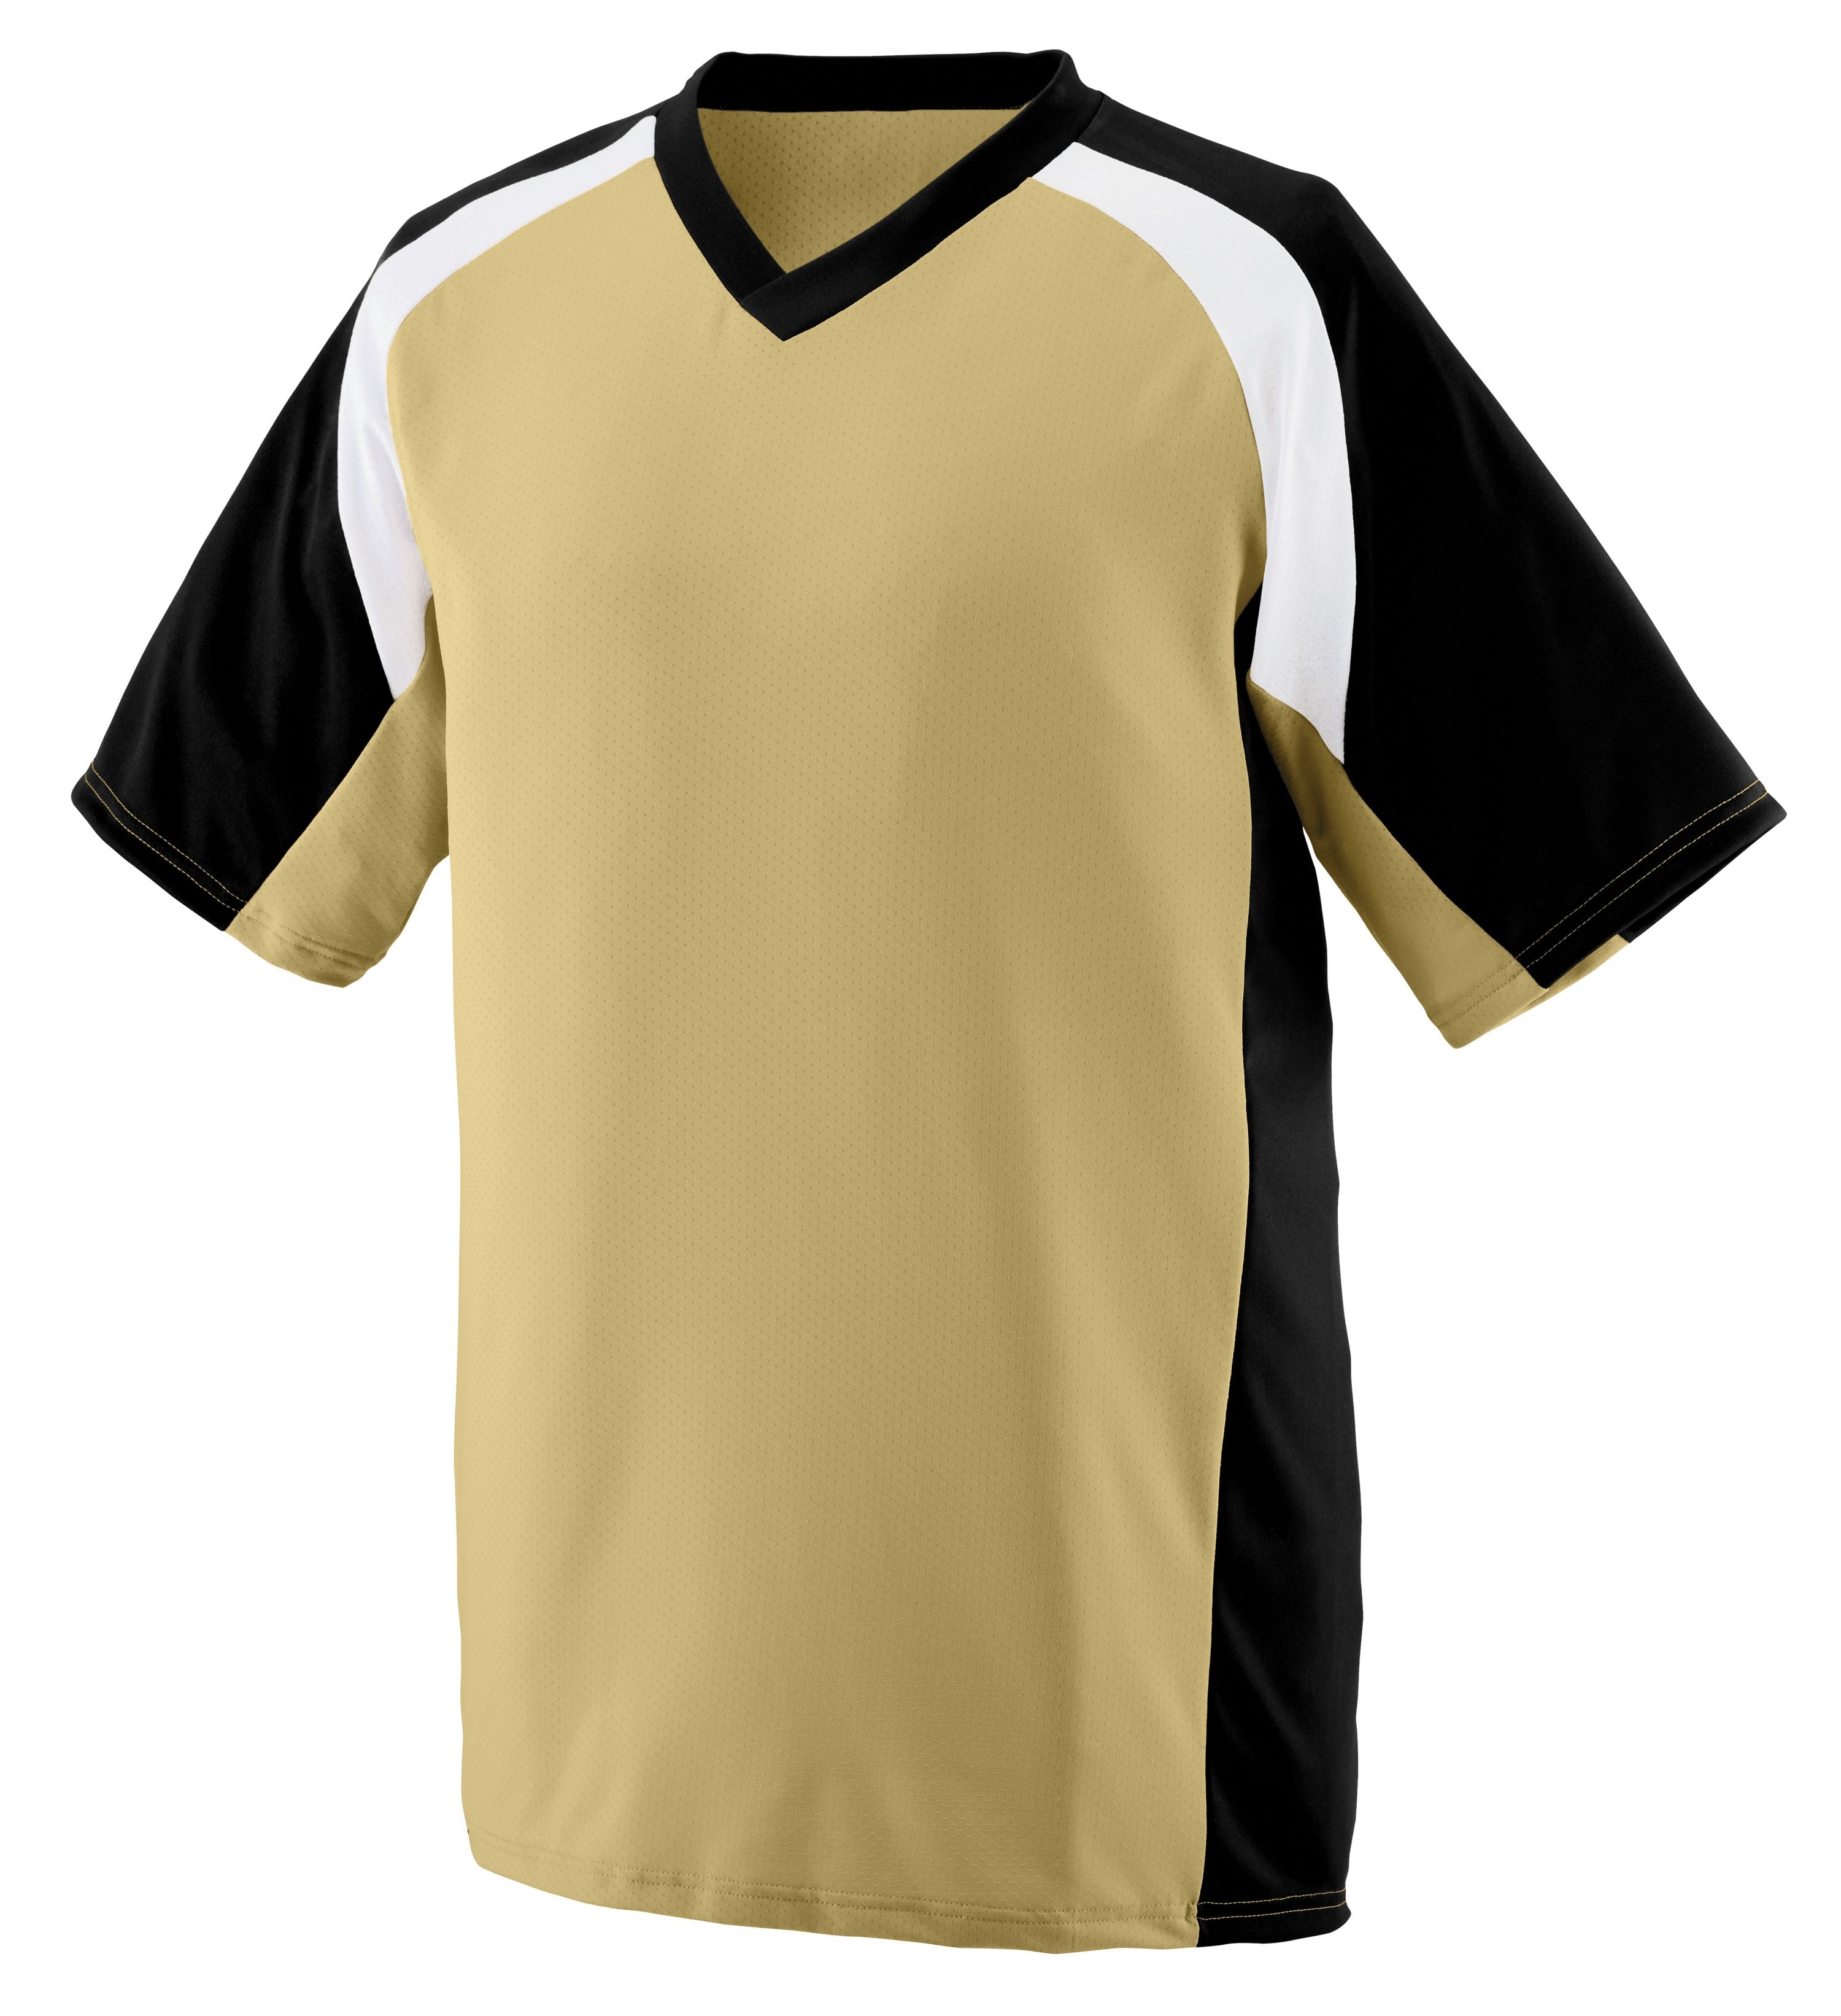 Augusta Sportswear Nitro Jersey in Vegas Gold/Black/White  -Part of the Adult, Adult-Jersey, Augusta-Products, Football, Shirts, All-Sports, All-Sports-1 product lines at KanaleyCreations.com